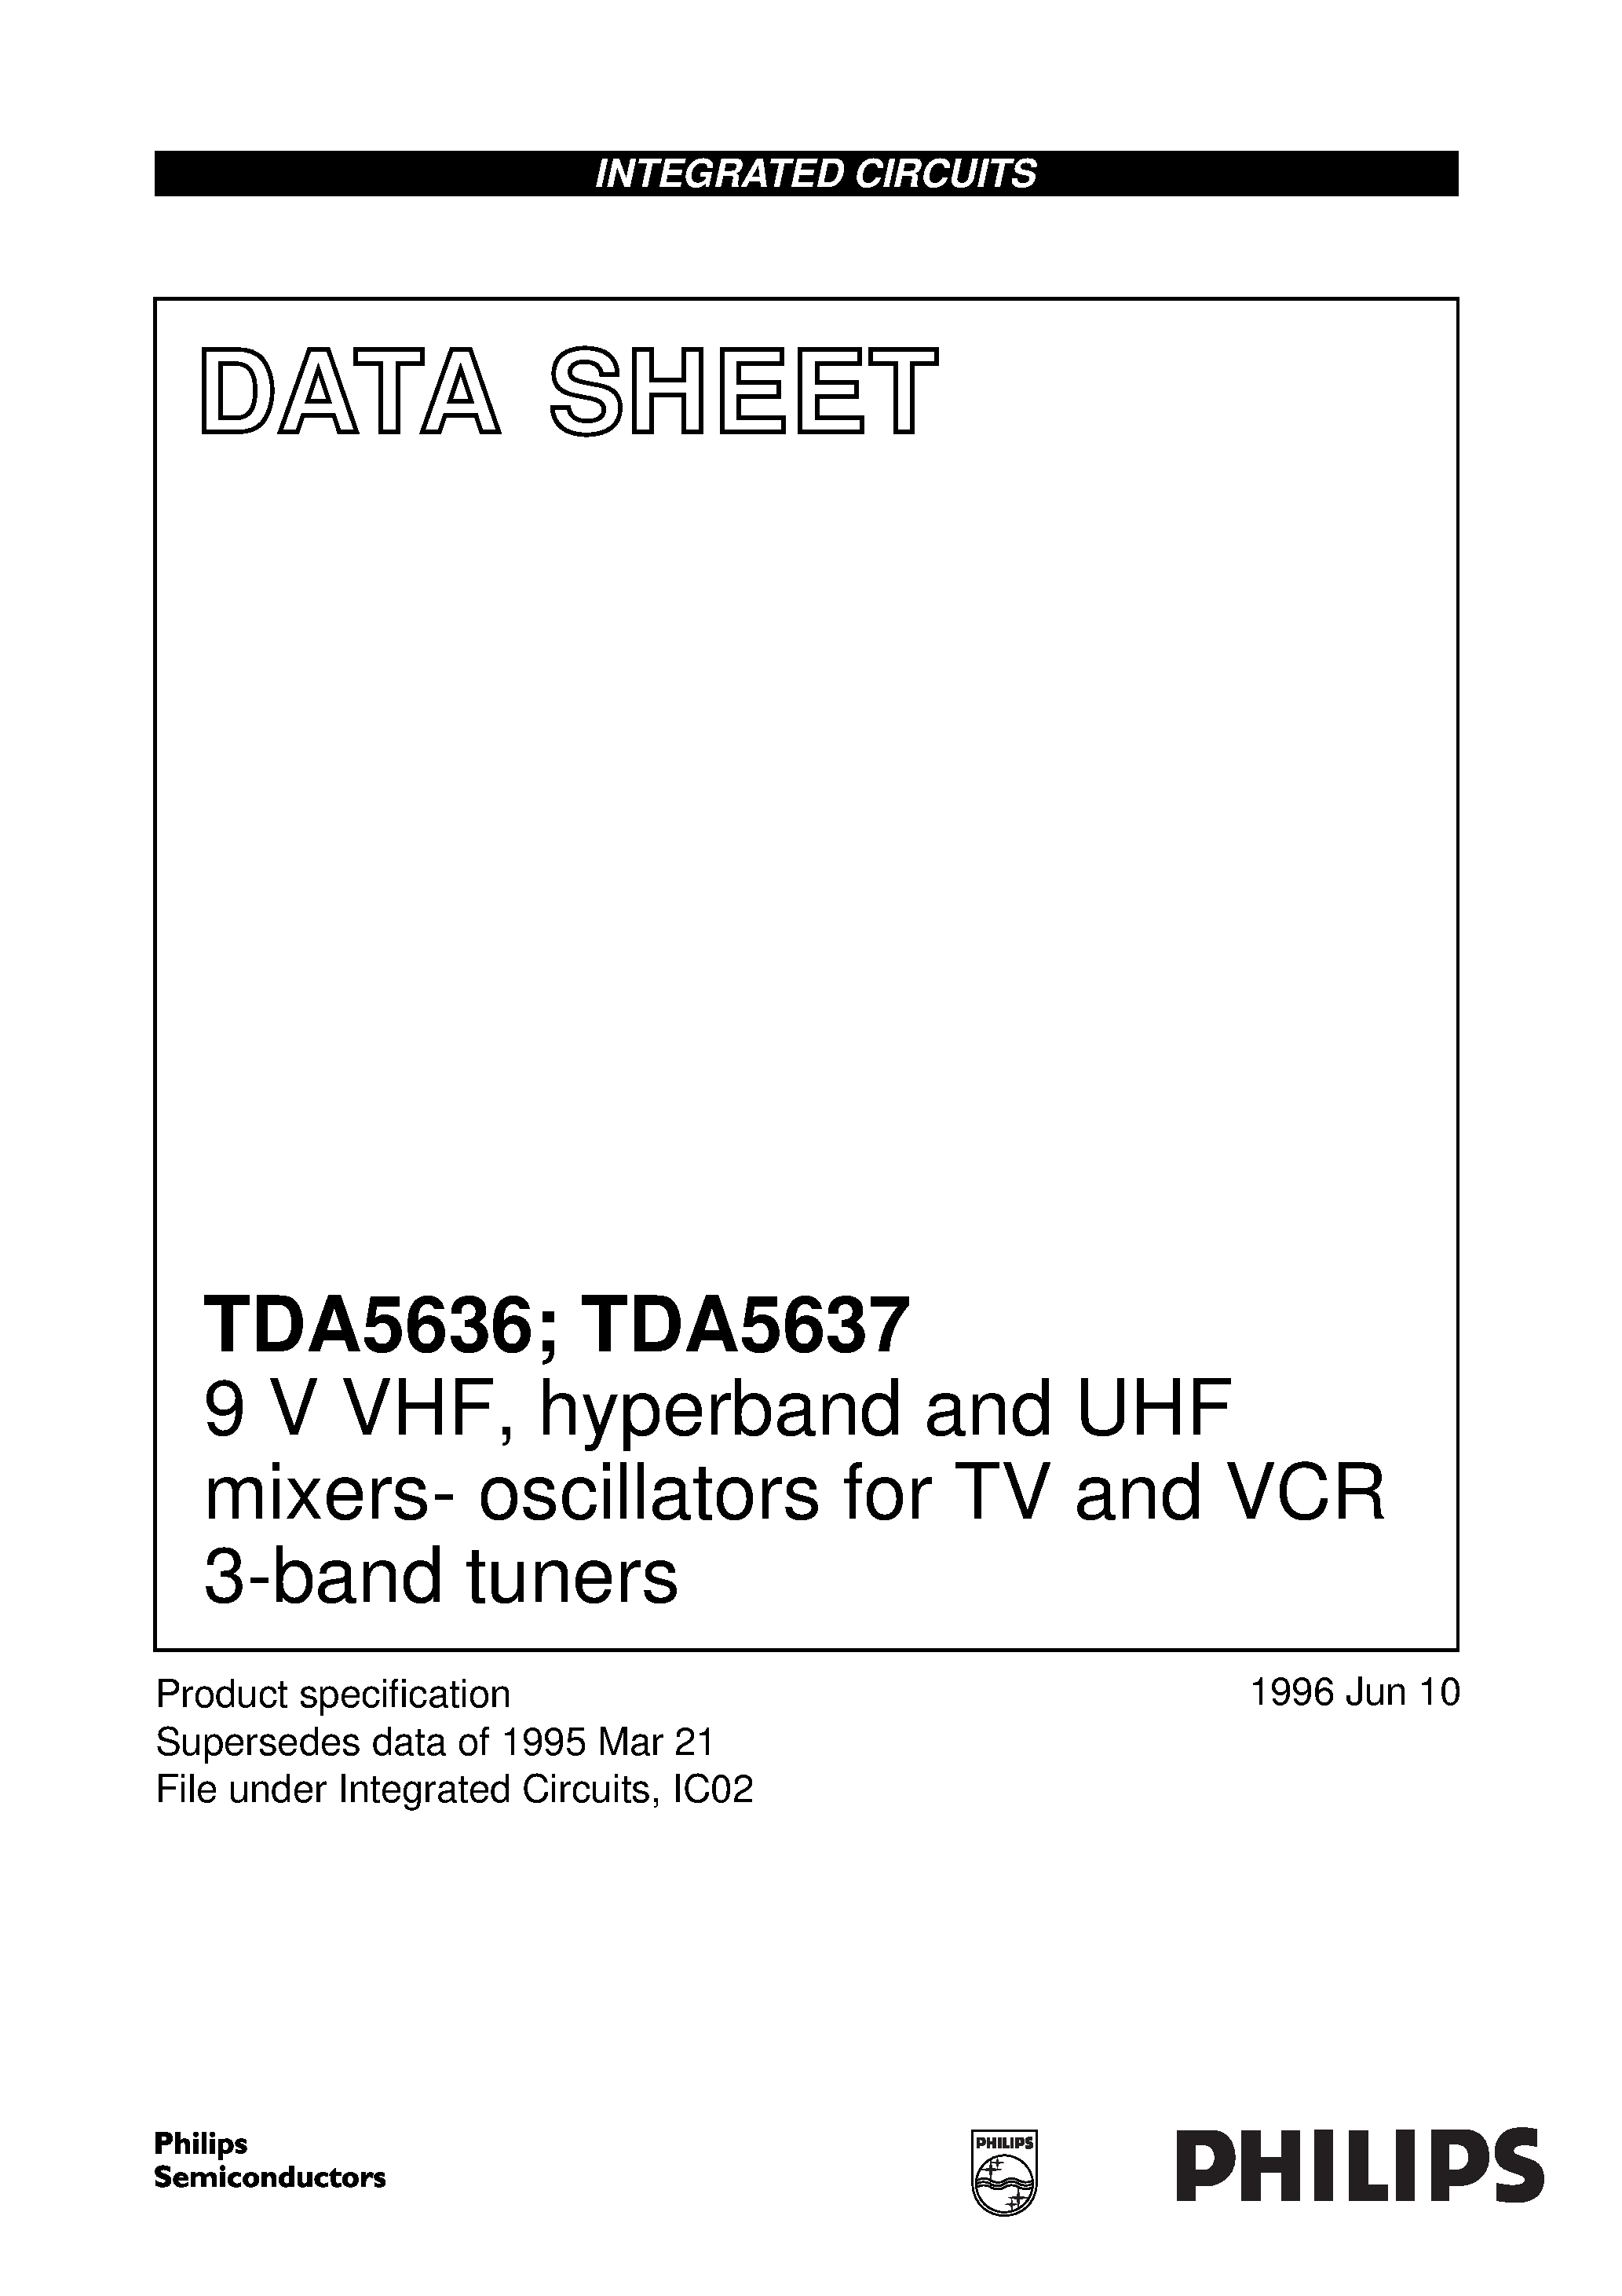 Даташит TDA5636 - 9 V VHF/ hyperband and UHF mixers- oscillators for TV and VCR 3-band tuners страница 1